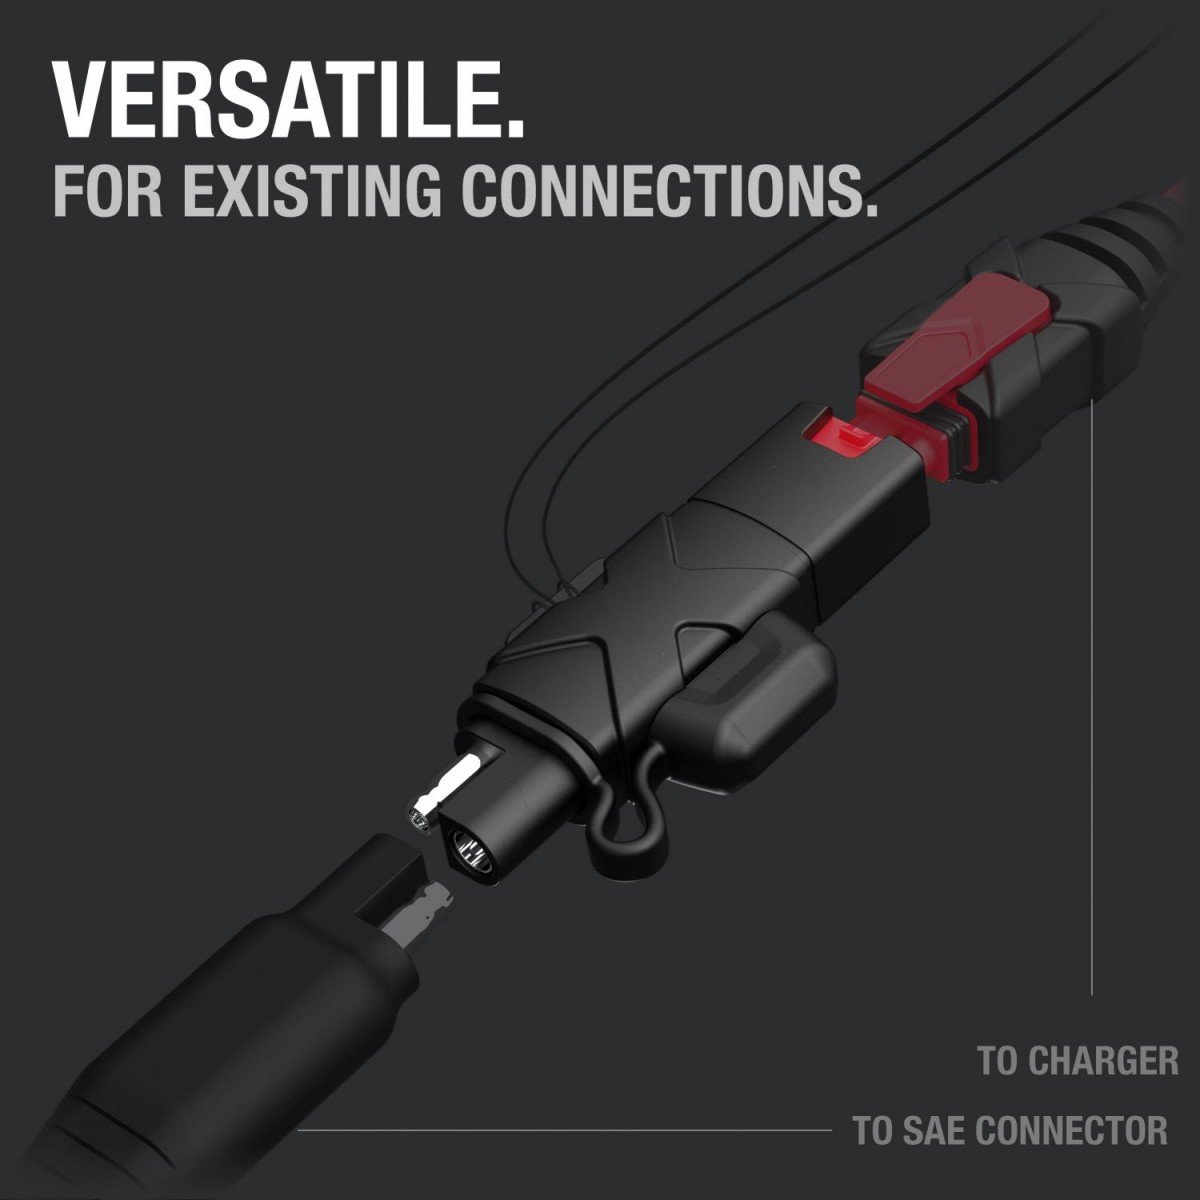 4-Versatile-For_Existing_Connections_72x-80.jpg